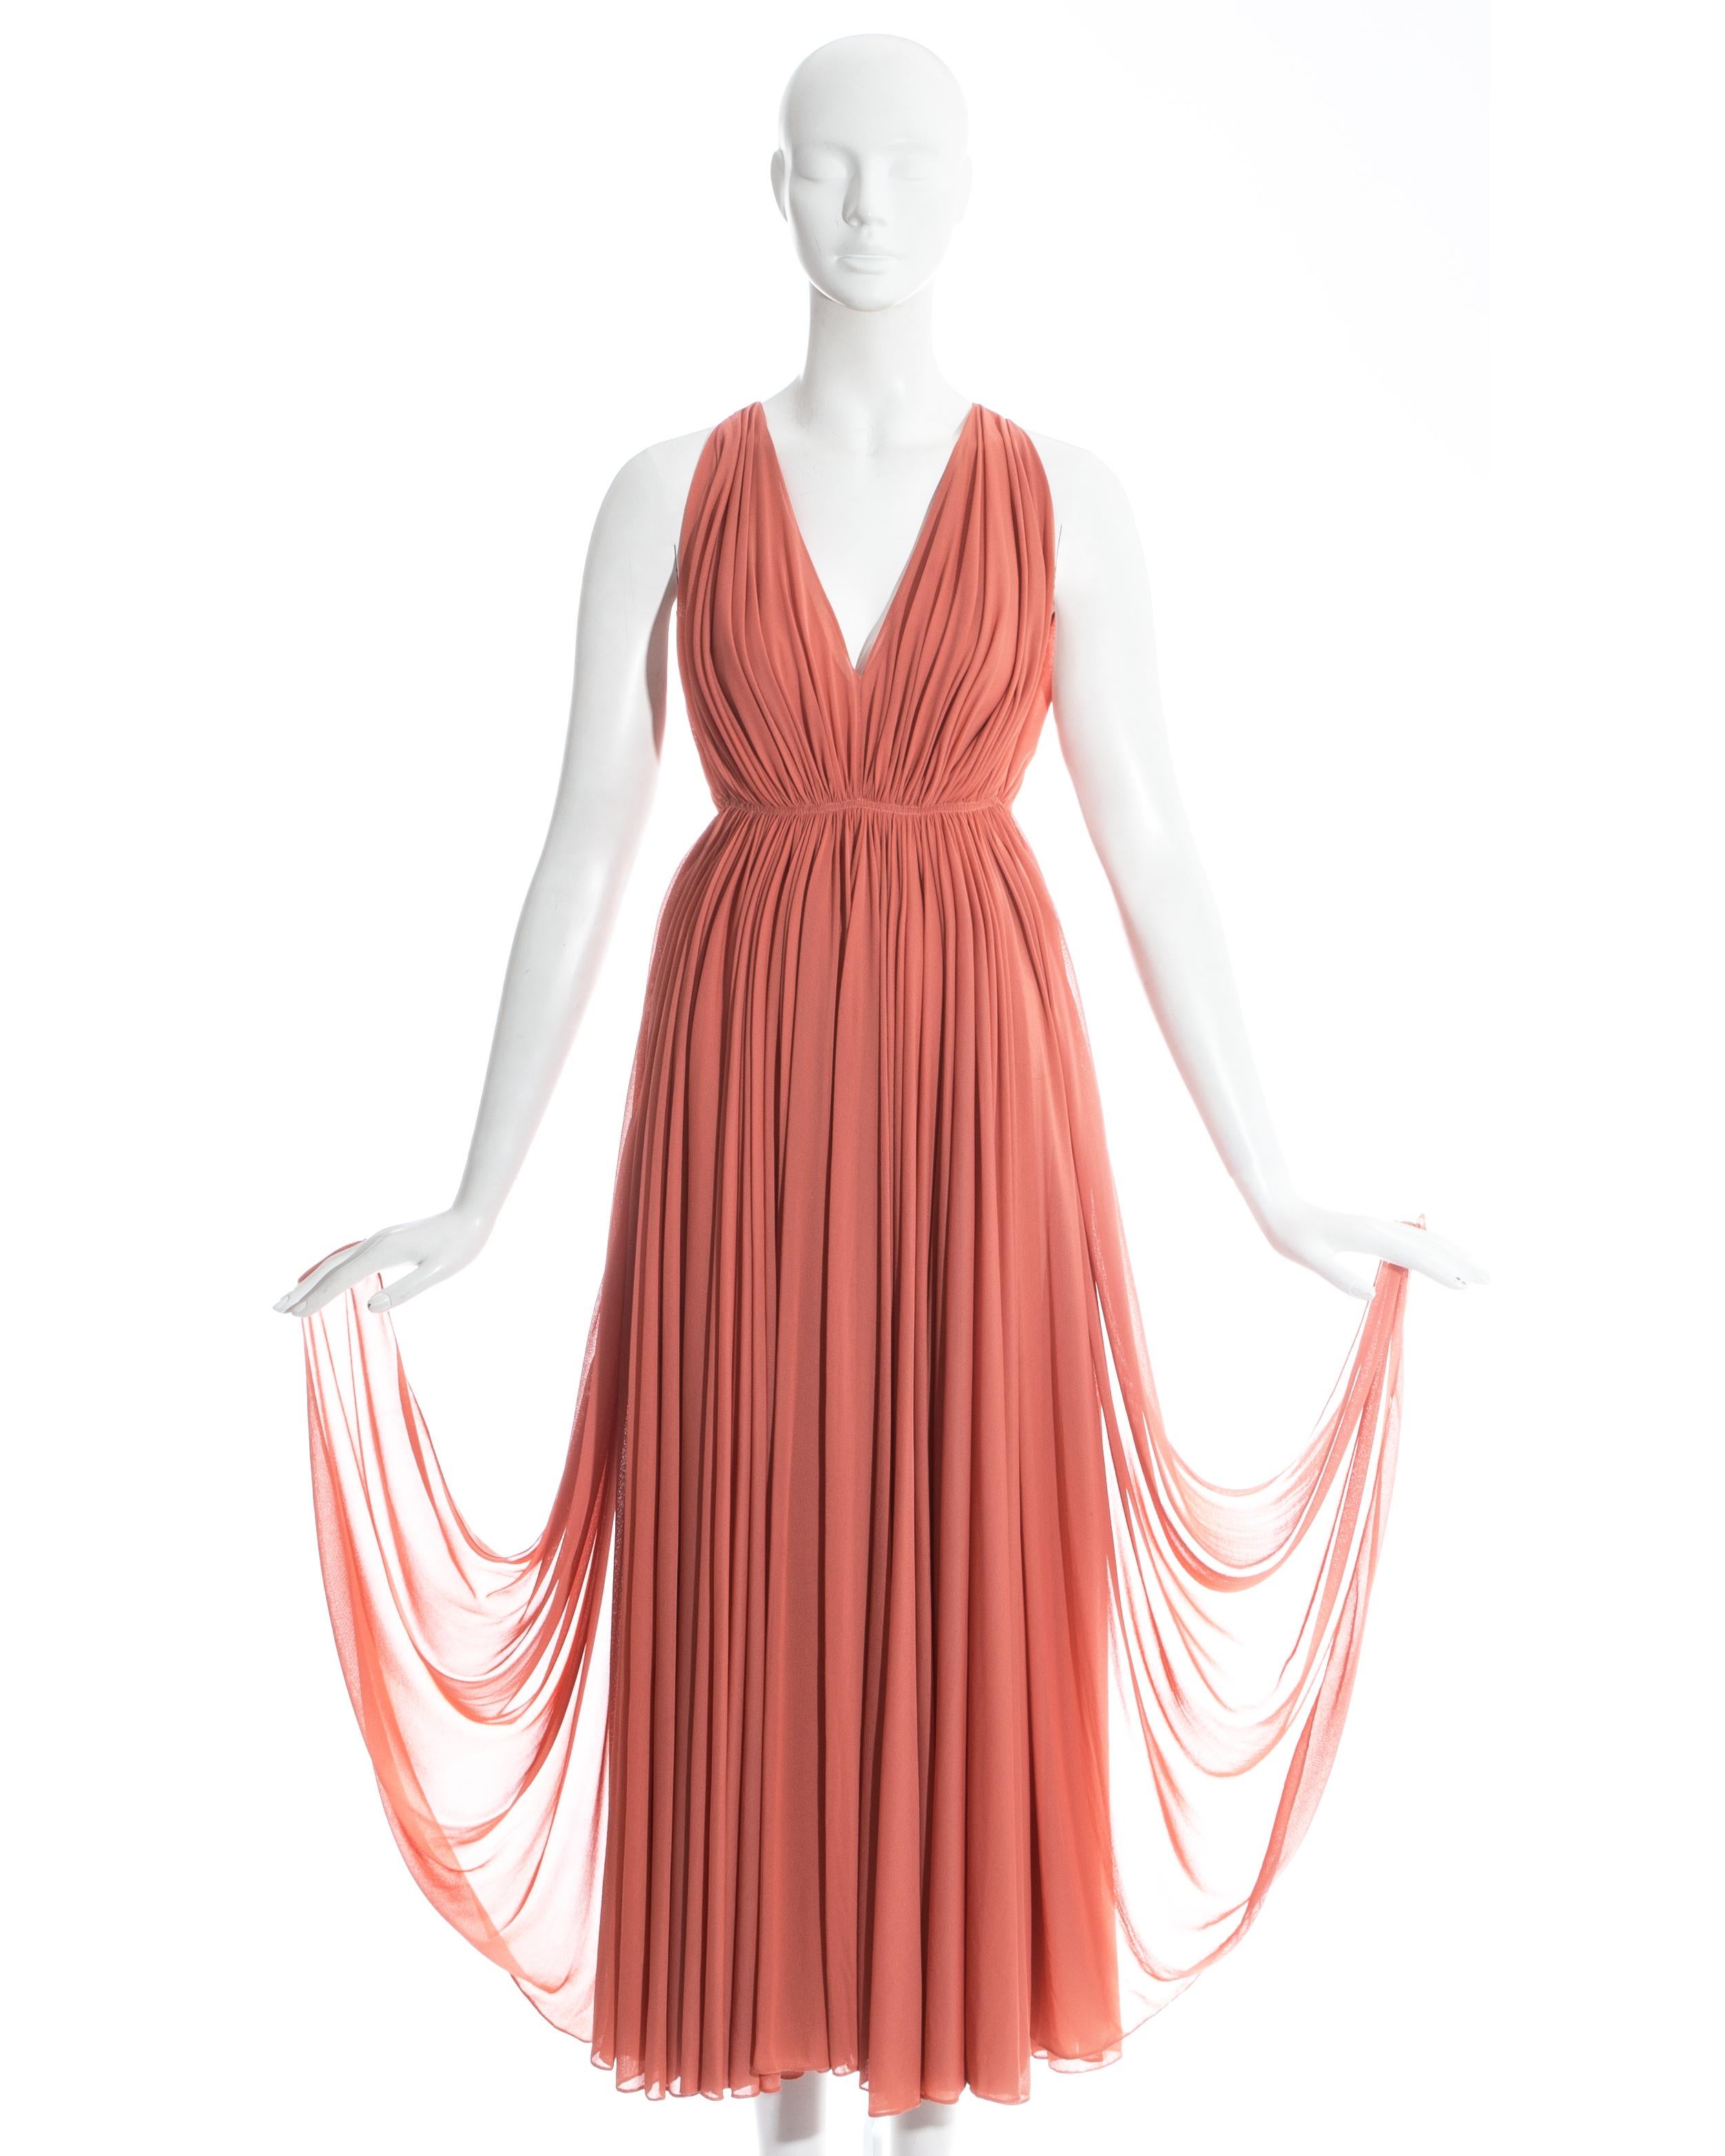 Azzedine Alaia coral jersey Grecian evening dress. Intricate pleating on the skirt and bust formed at the waistband. 6 High leg slits. Hook and eye fastening at the center back. 

Spring-Summer 1991

* This dress would be best fitted on a petite